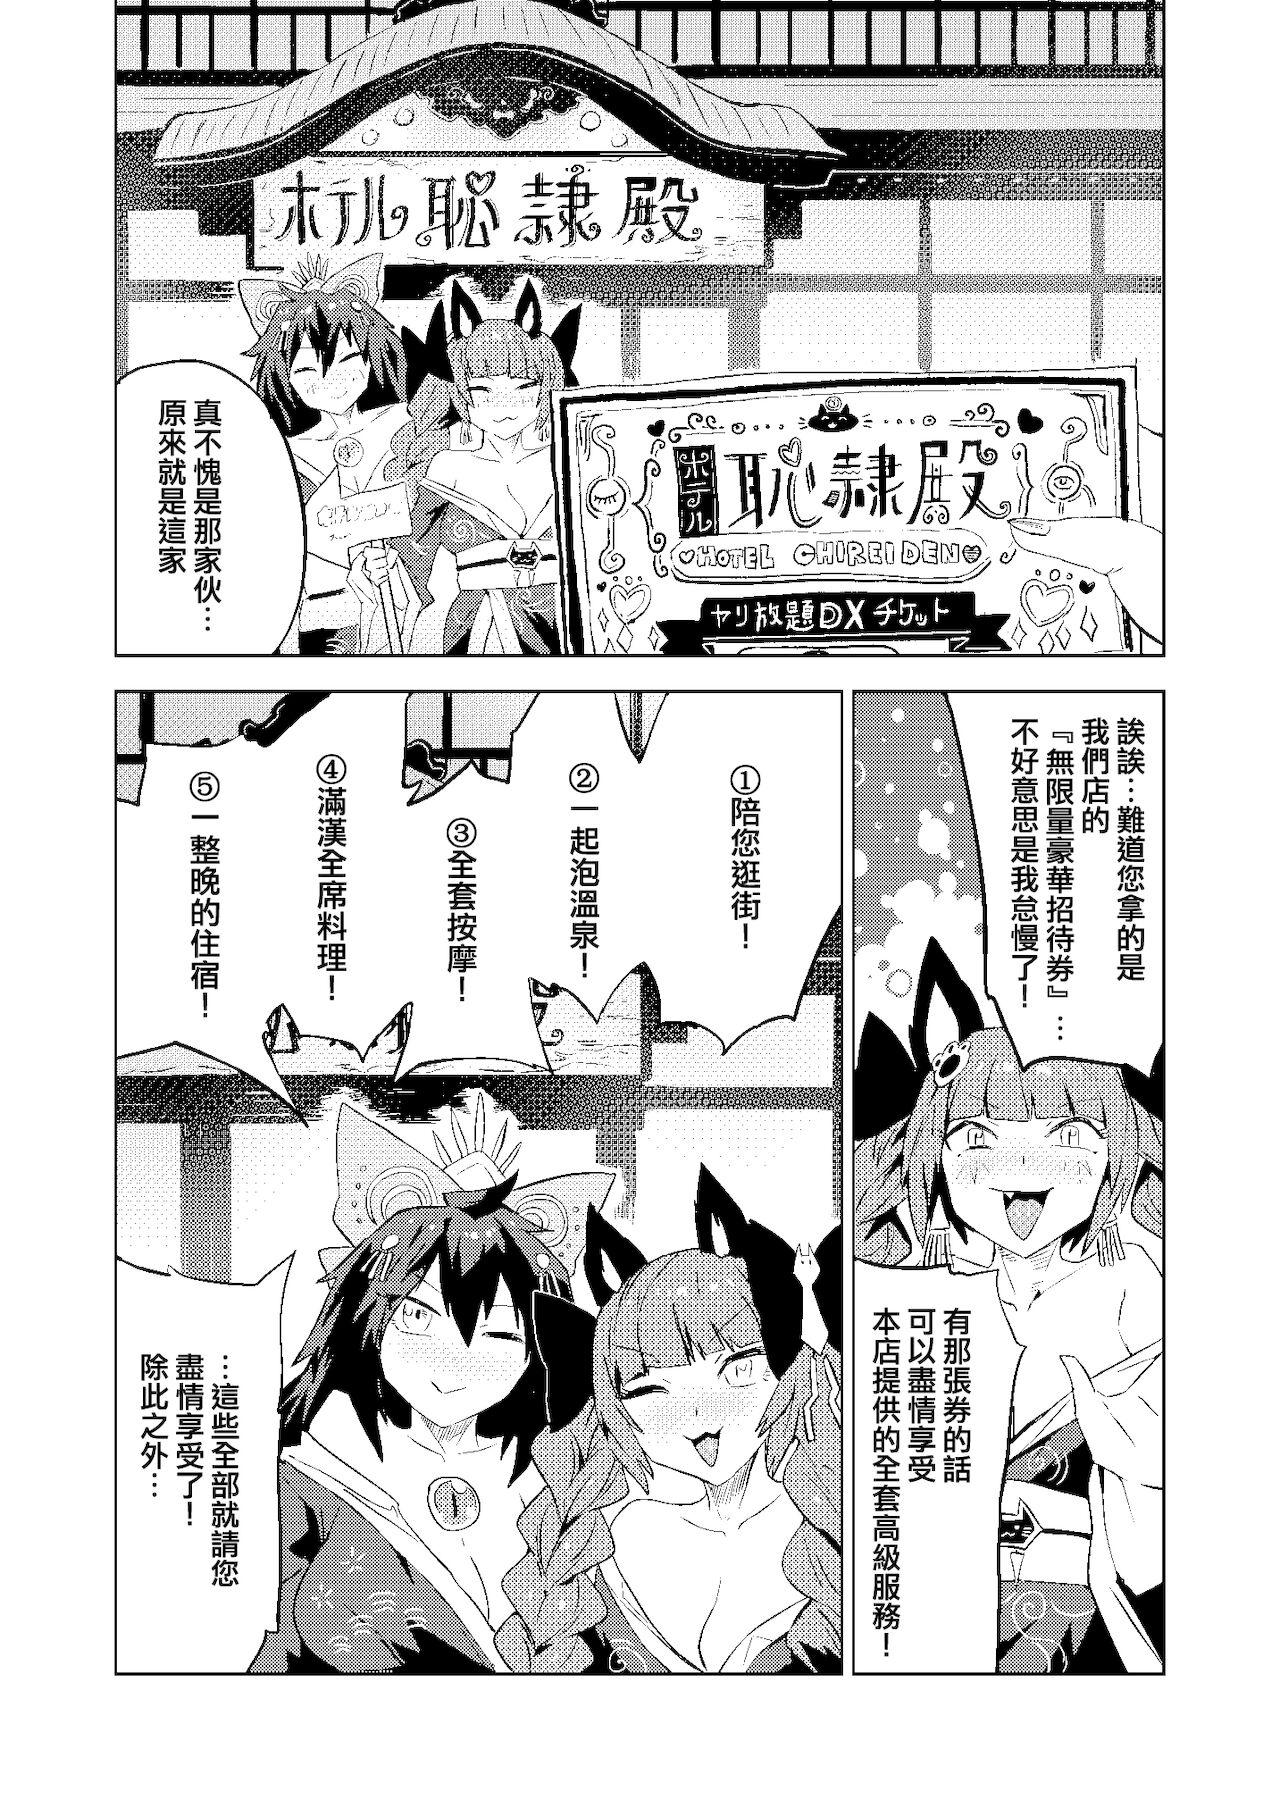 Bokep Chireiden | 耻隶殿 - Touhou project Couch - Page 7